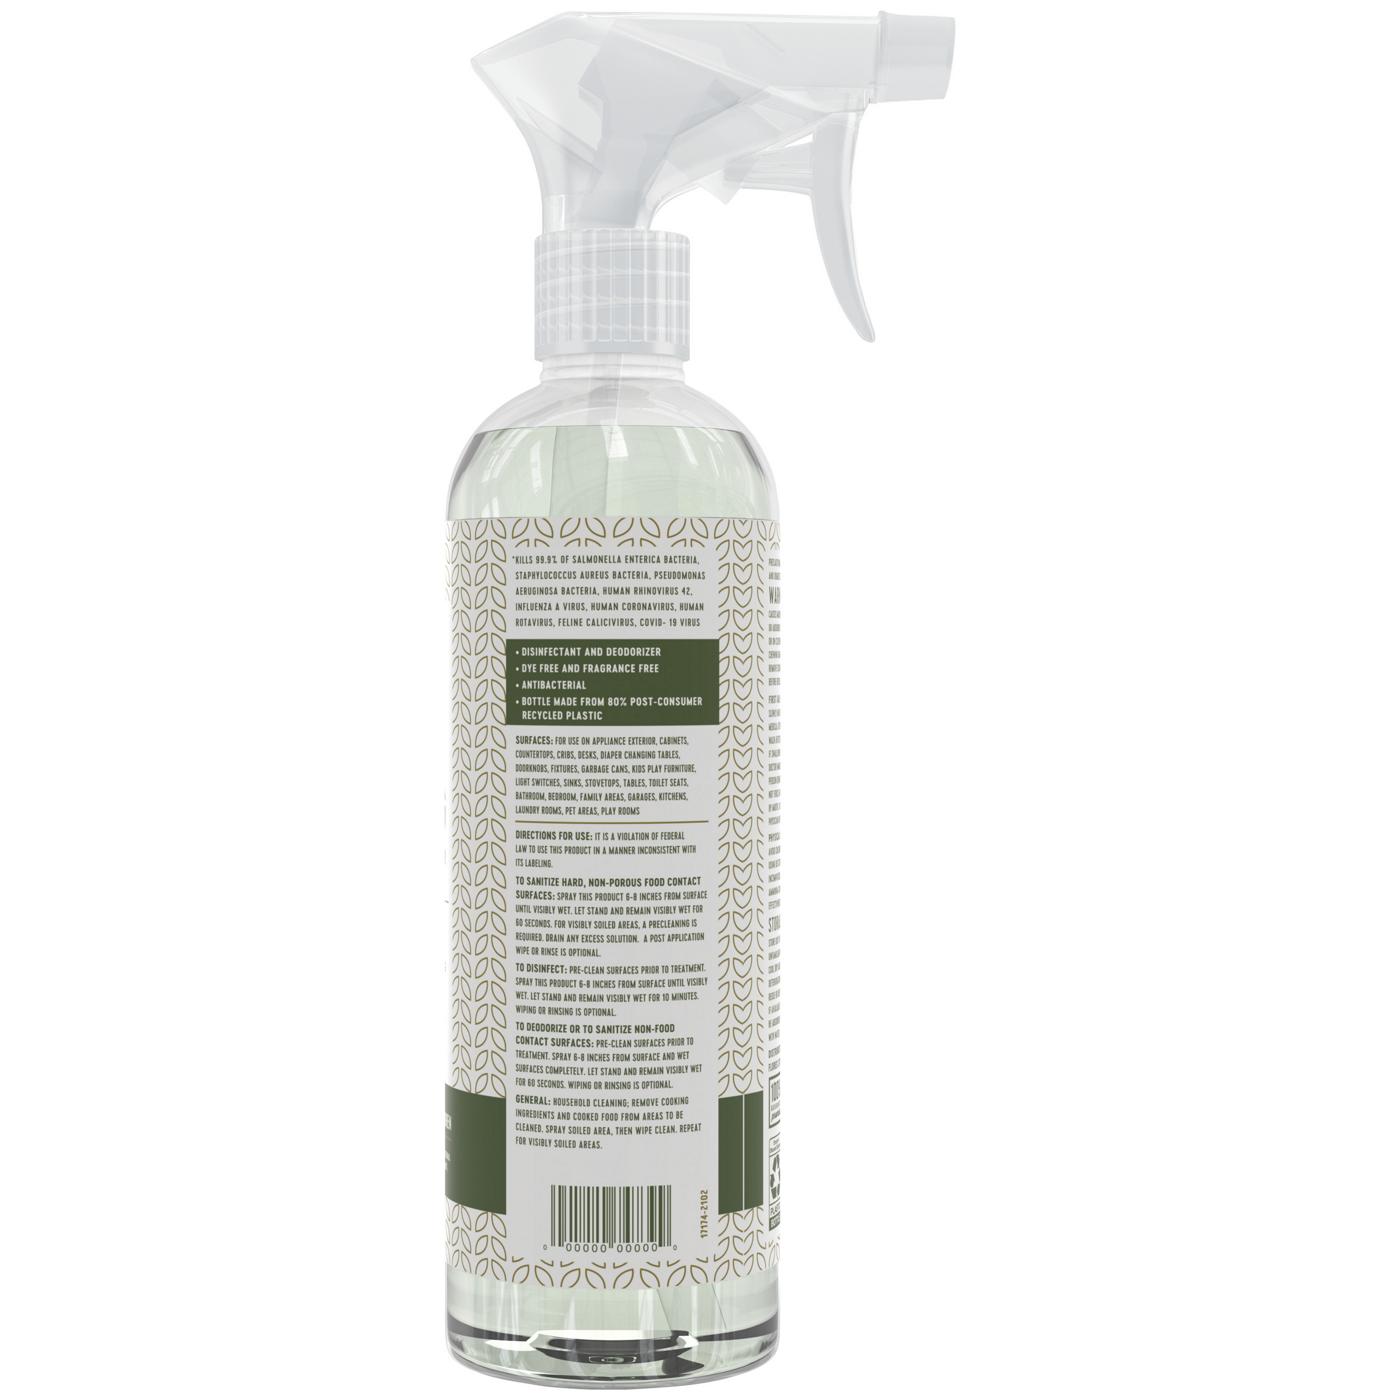 Puracy Multi-Surface Cleaner, Natural Everyday Household All